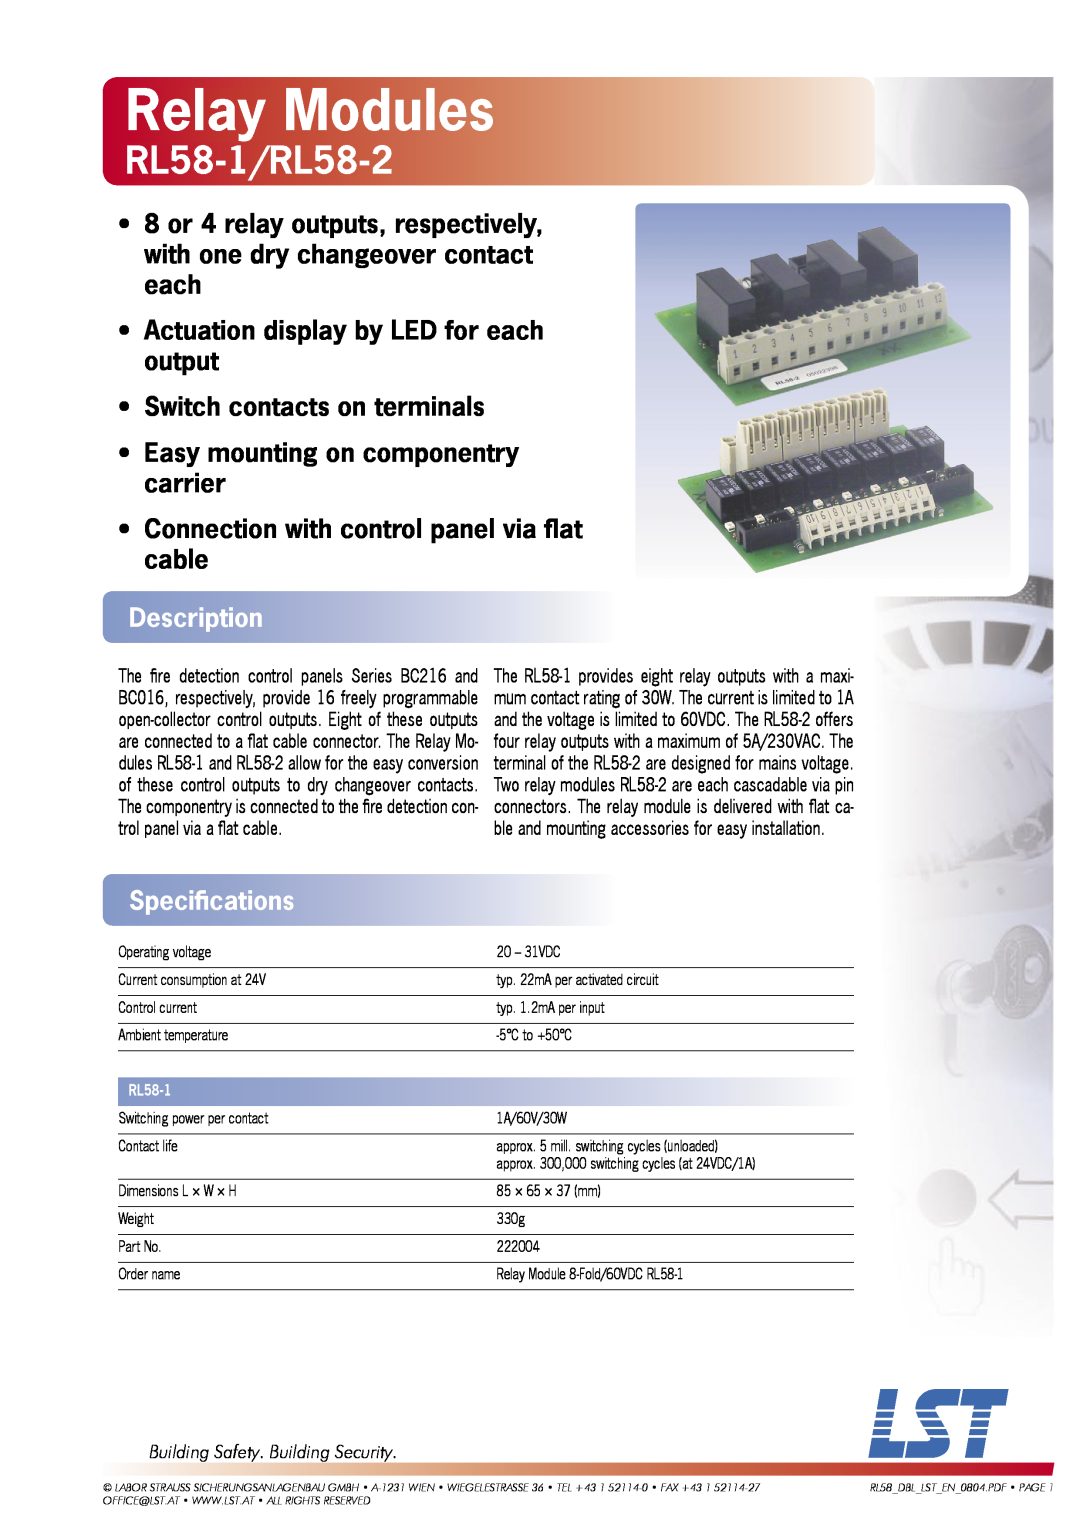 LST specifications Building Safety. Building Security, Relay Modules, RL58-1/RL58-2, Description, Speciﬁcations 